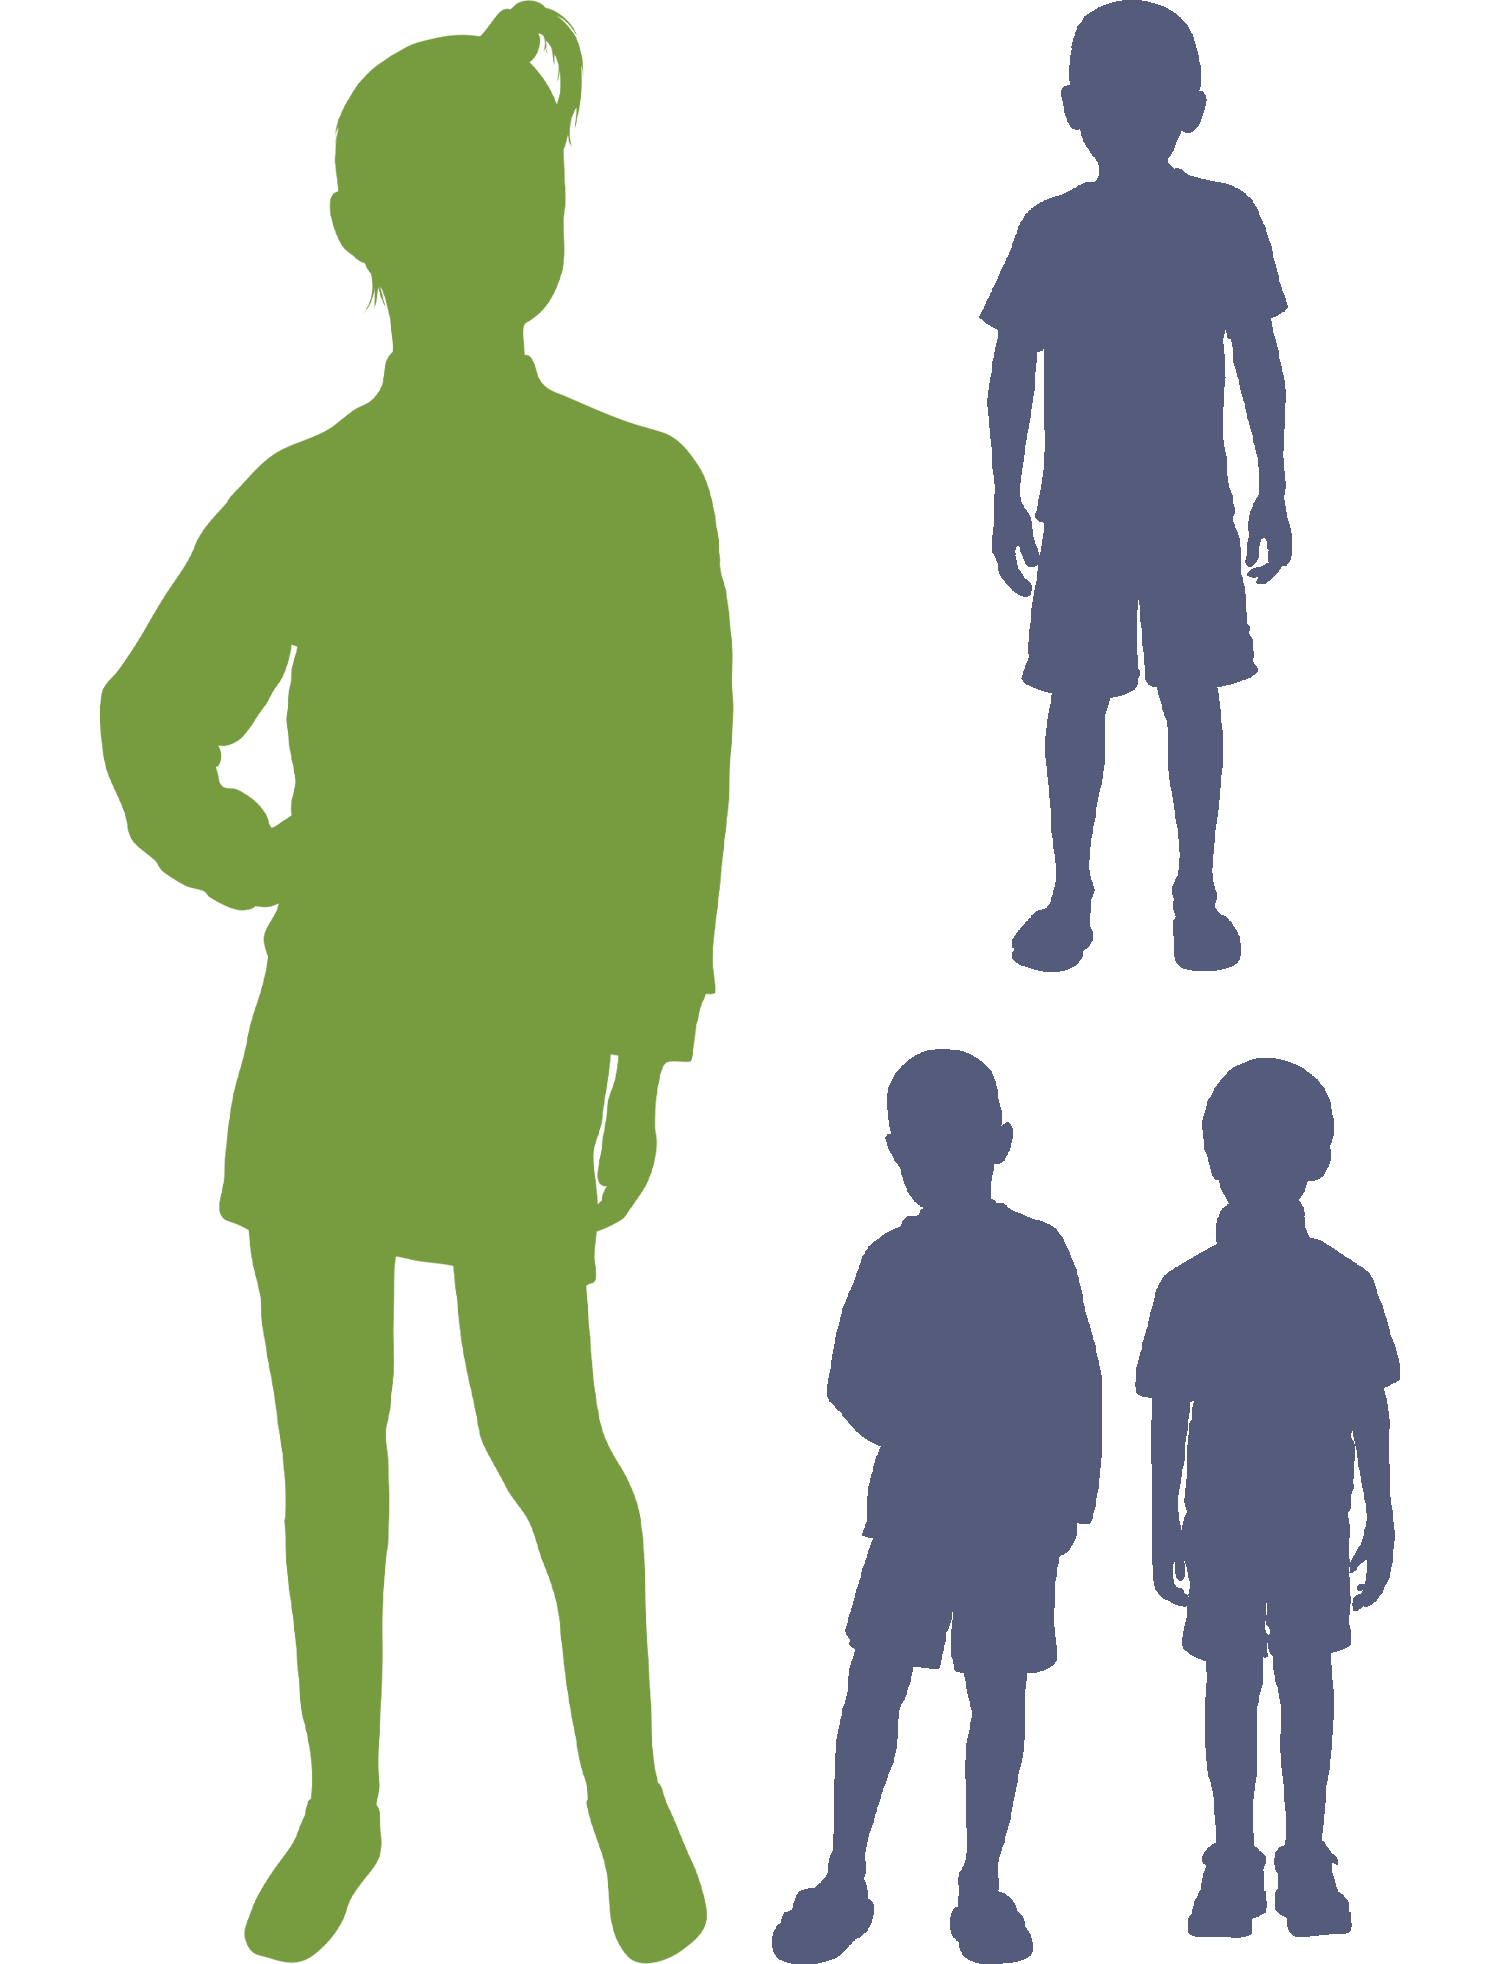 Illustration of one girl and four boys